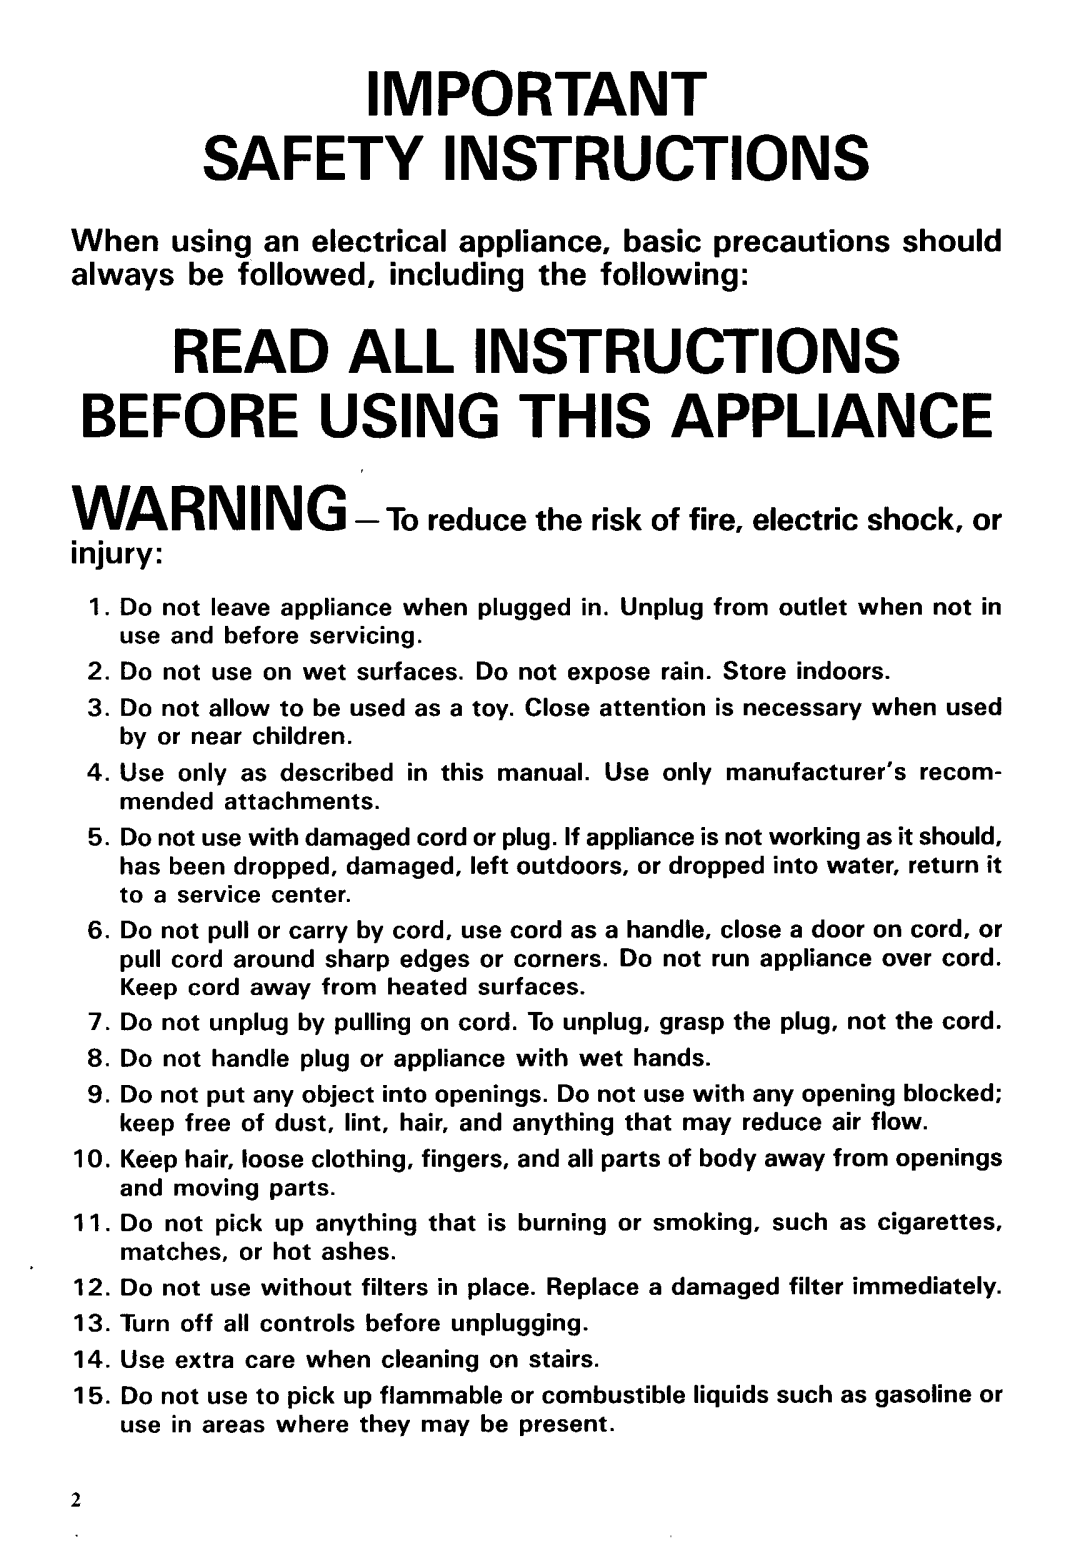 Makita 406 instruction manual Safety Instructions, Read All Instructions Before Using This Appliance 